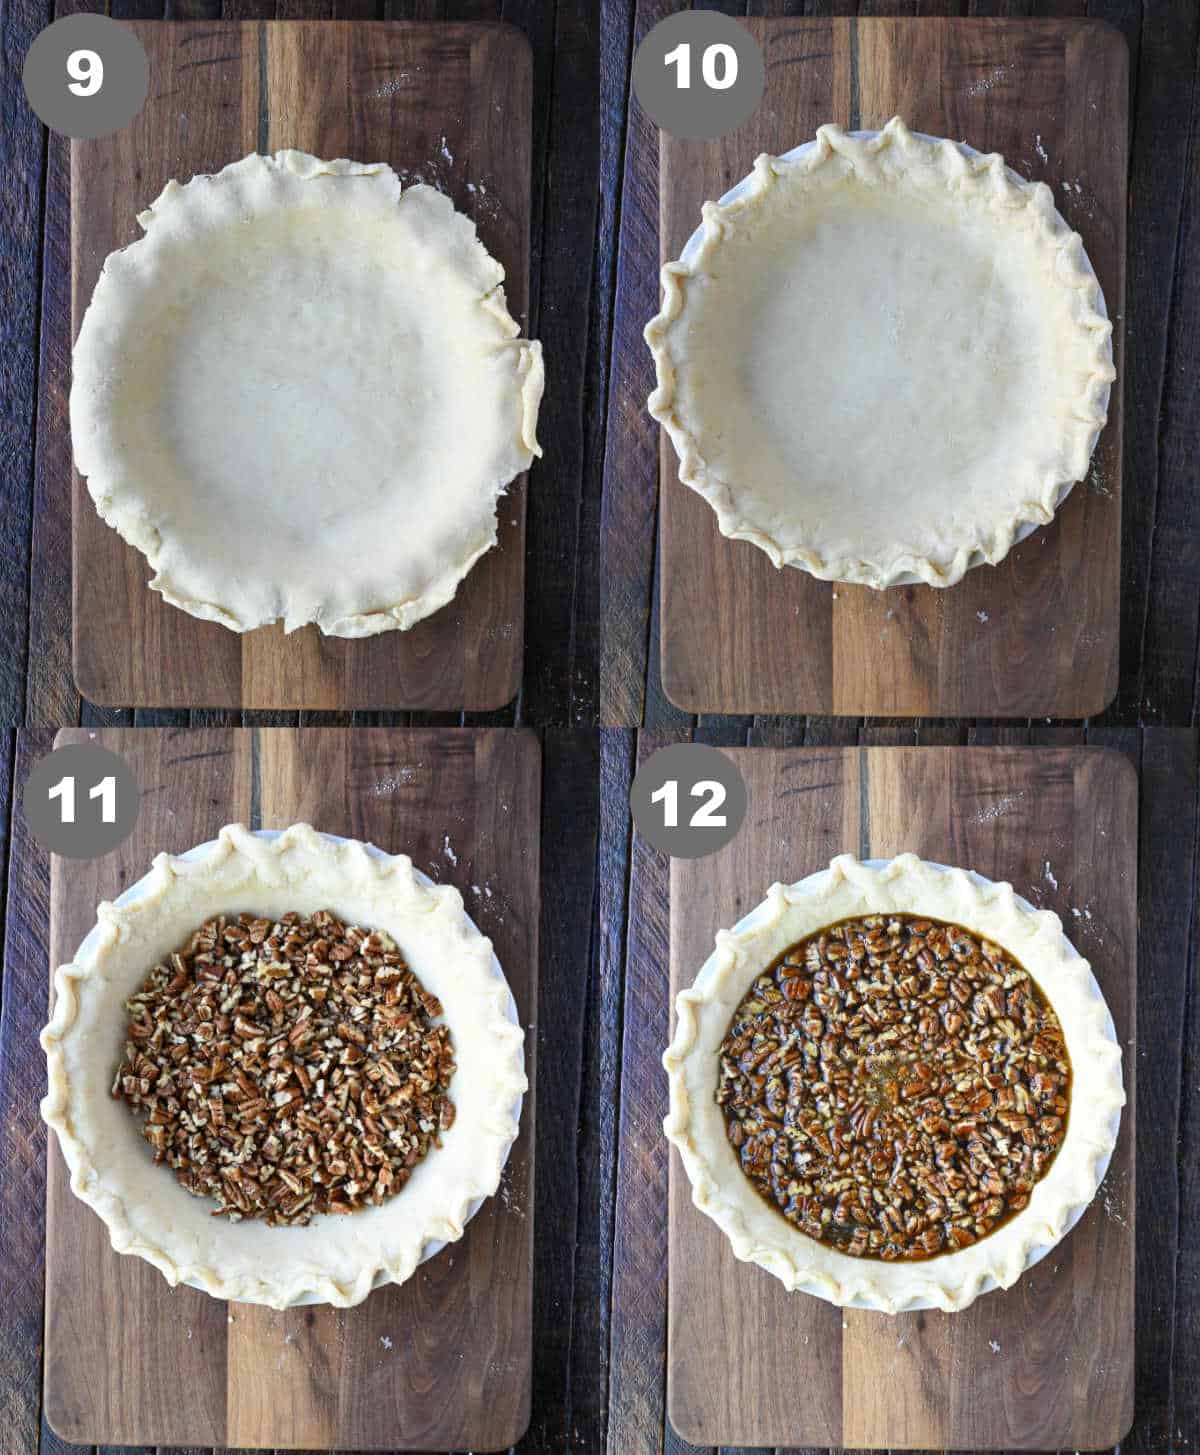 Pie crust in a pie dish and chopped pecans added.